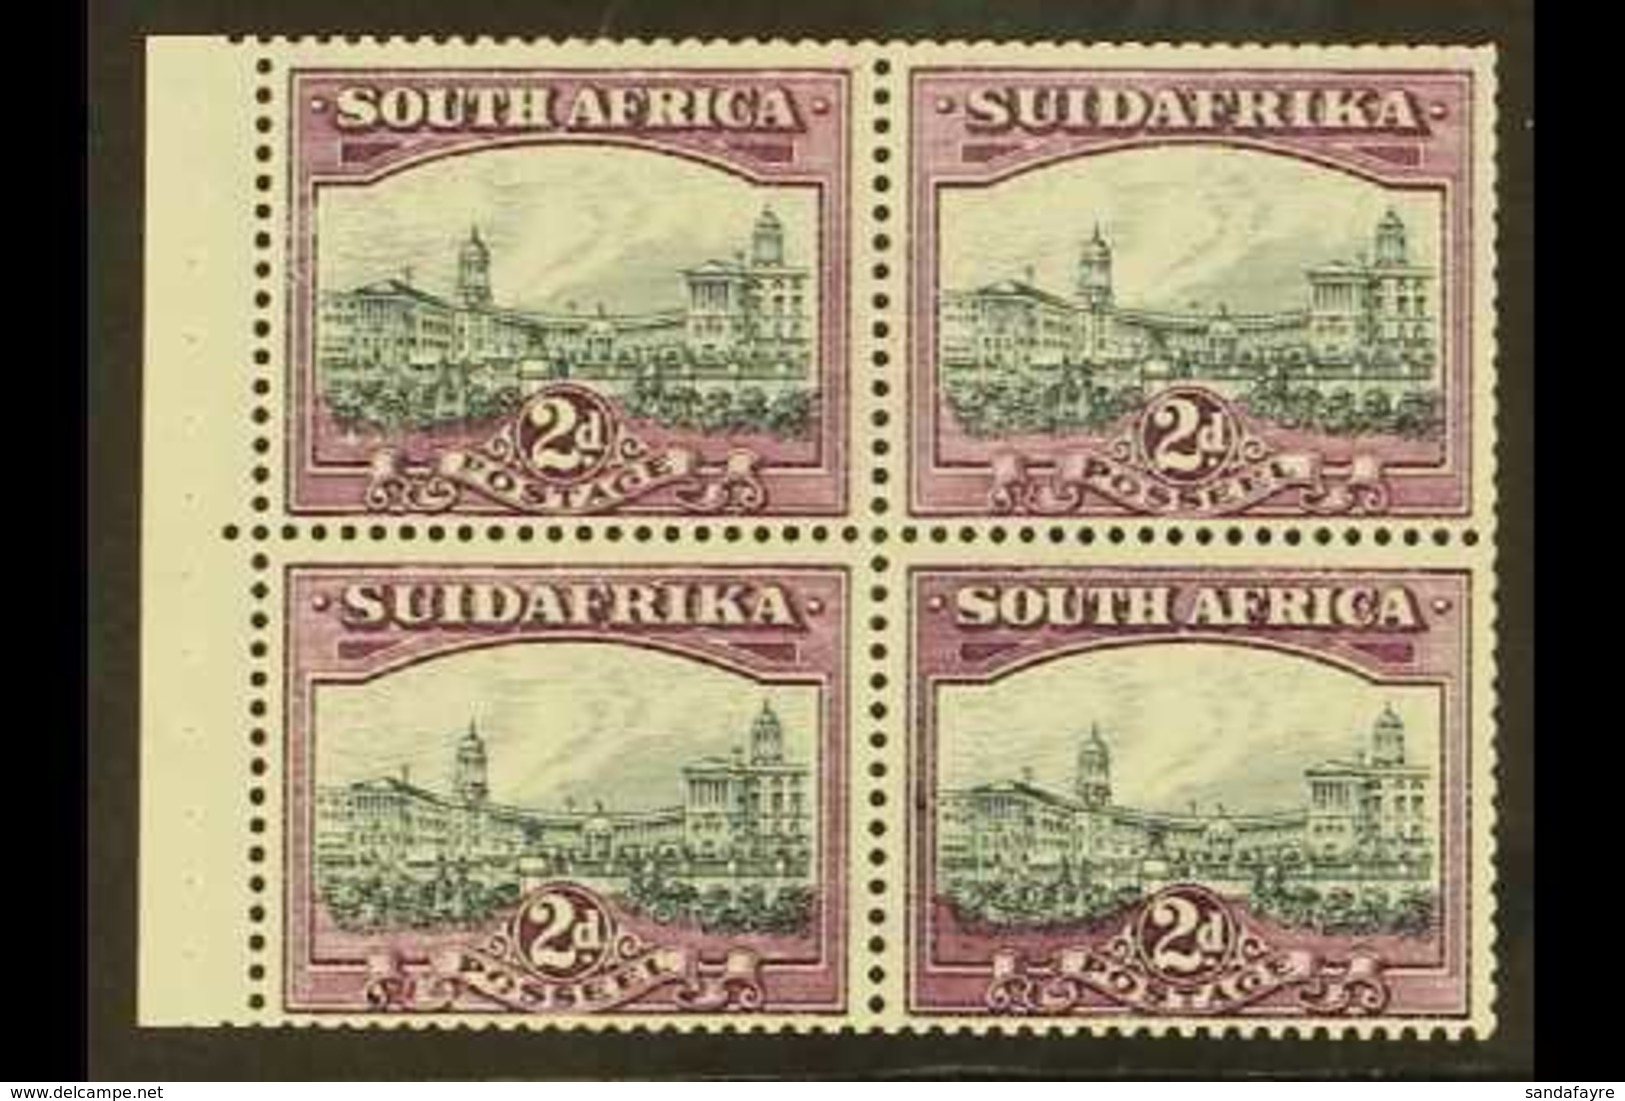 BOOKLET PANE 1931 2d Watermark Upright, COMPLETE PANE OF FOUR From Rare 1931 3s Rotogravure Booklets, As SG 44, Very Fin - Unclassified